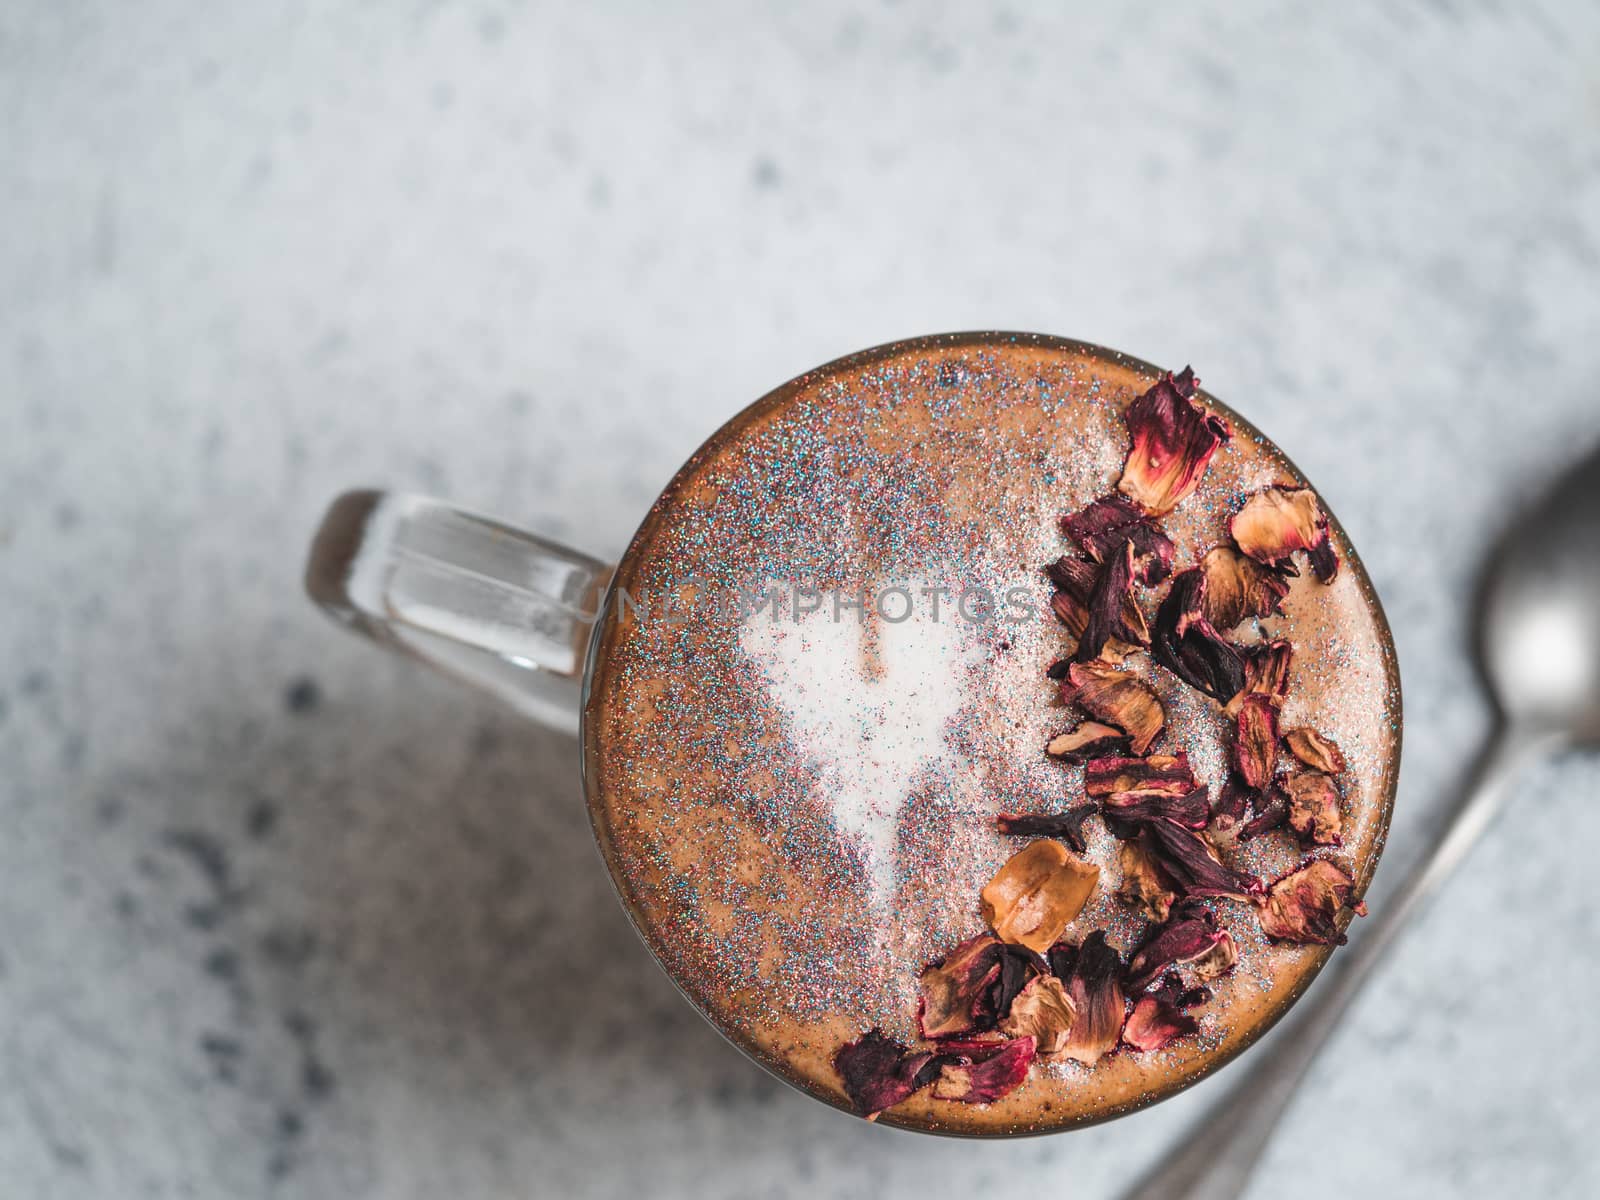 diamond cappuccino coffee with dried rose petals by fascinadora